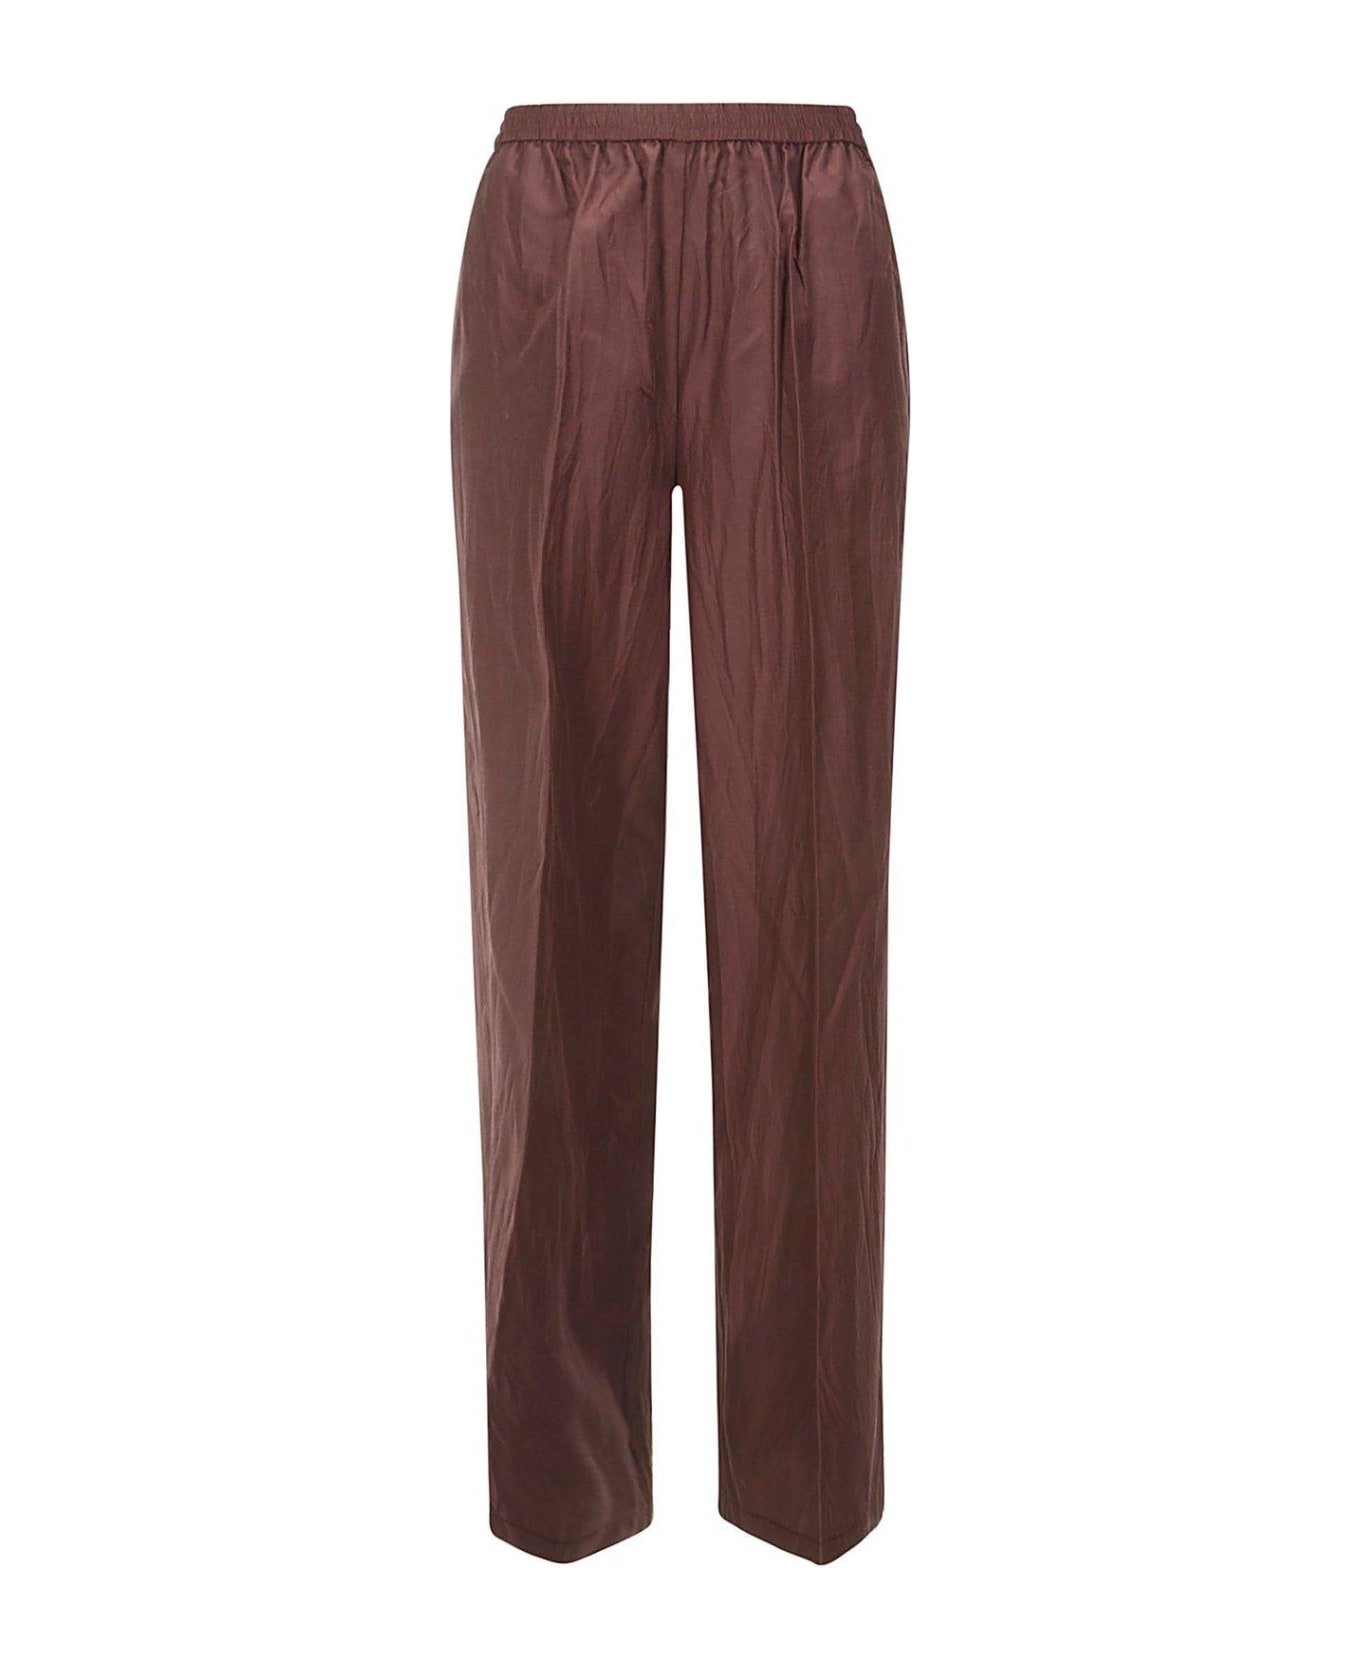 Forte_Forte Wide-leg Chic Pants - Cacao ボトムス